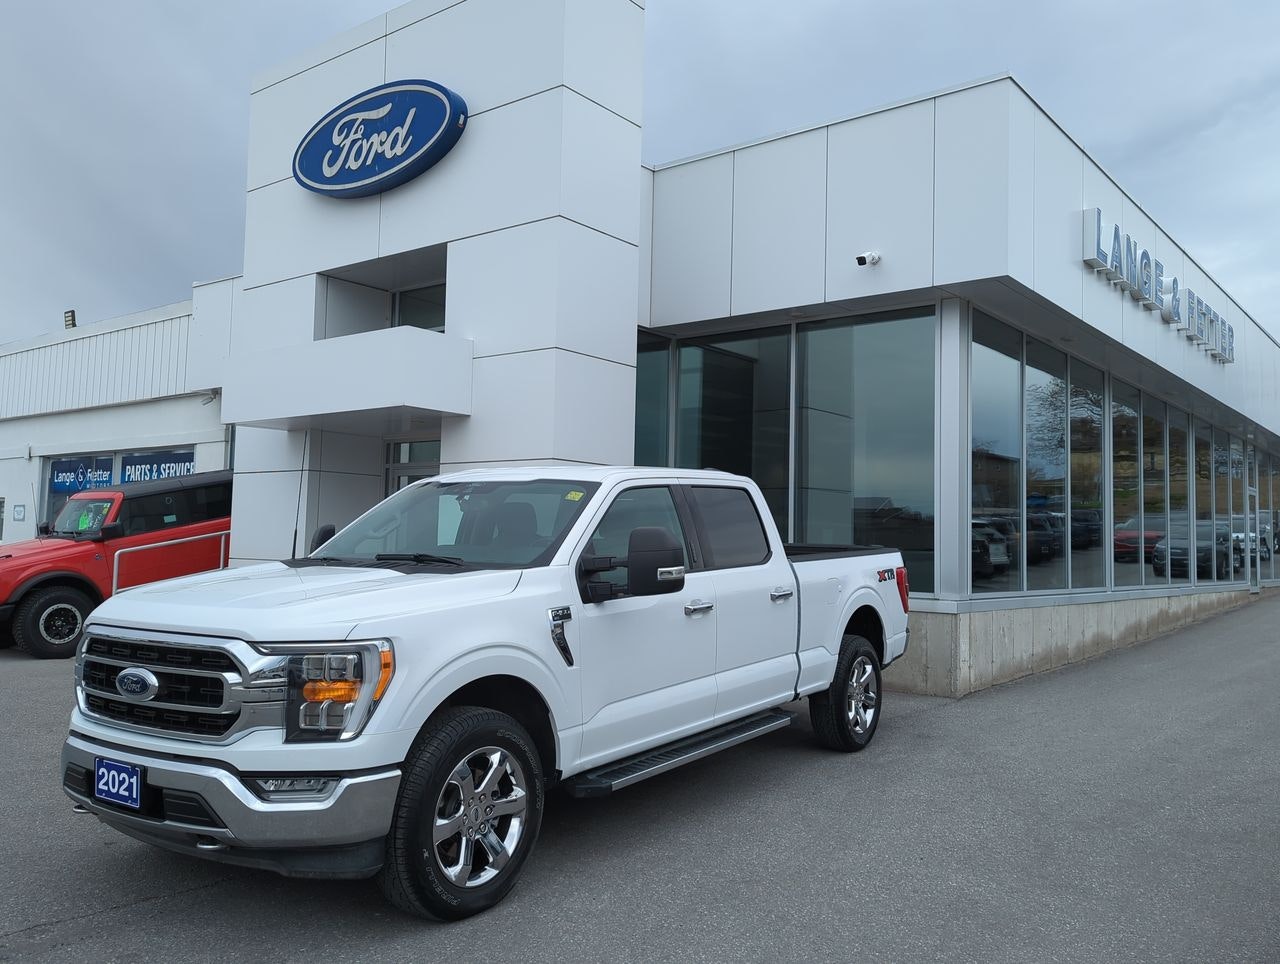 2021 Ford F-150 - 21801A Full Image 1